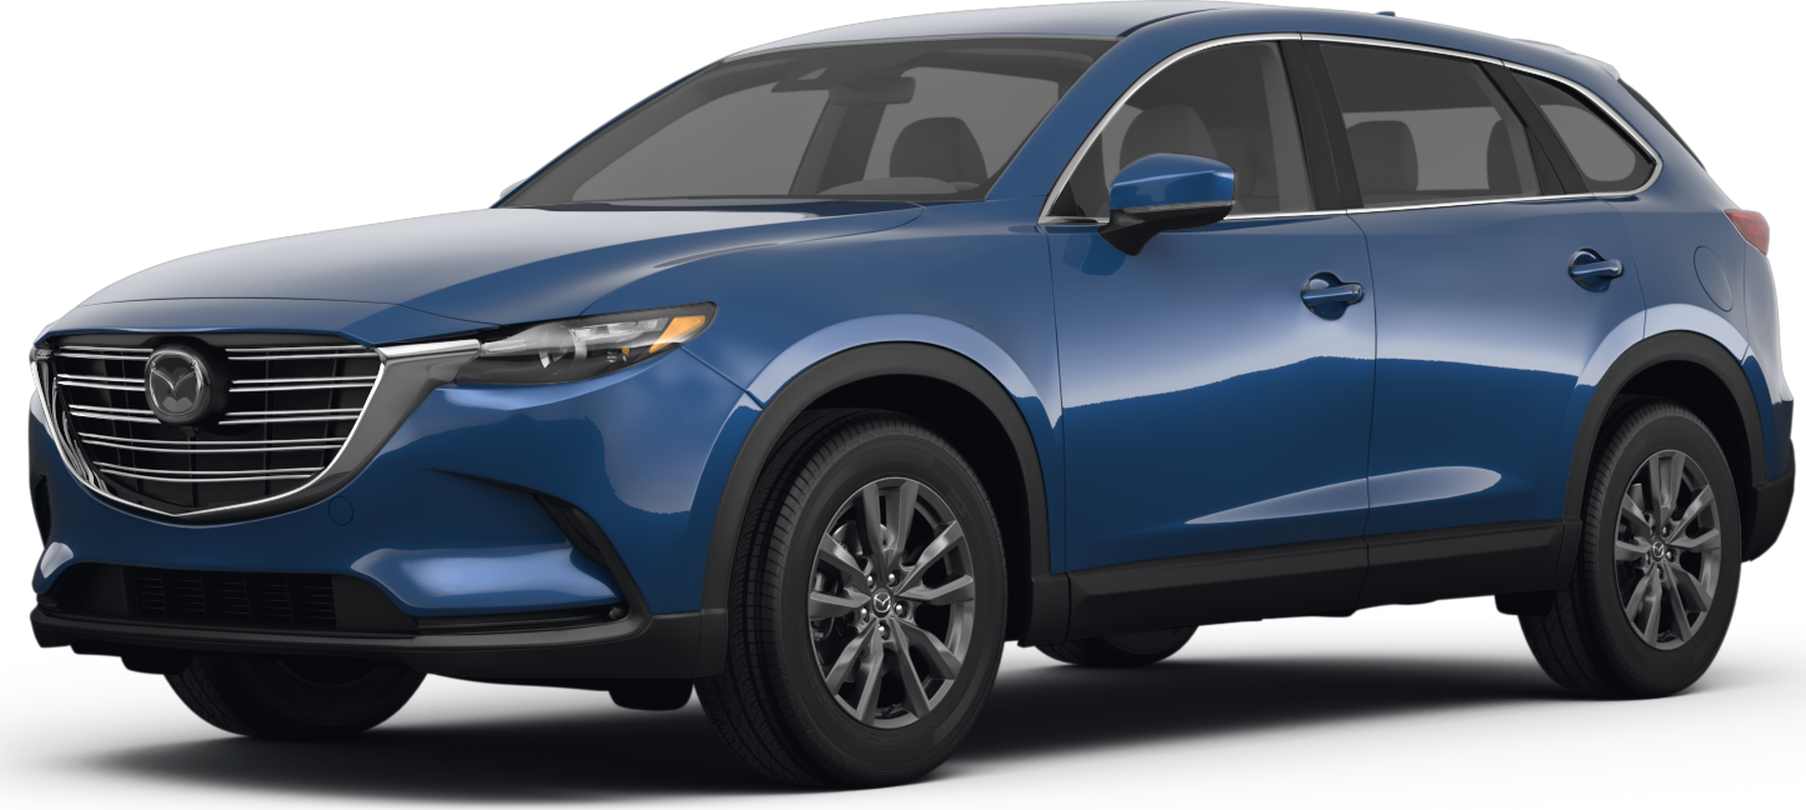 New 2022 MAZDA CX9 Reviews, Pricing & Specs Kelley Blue Book